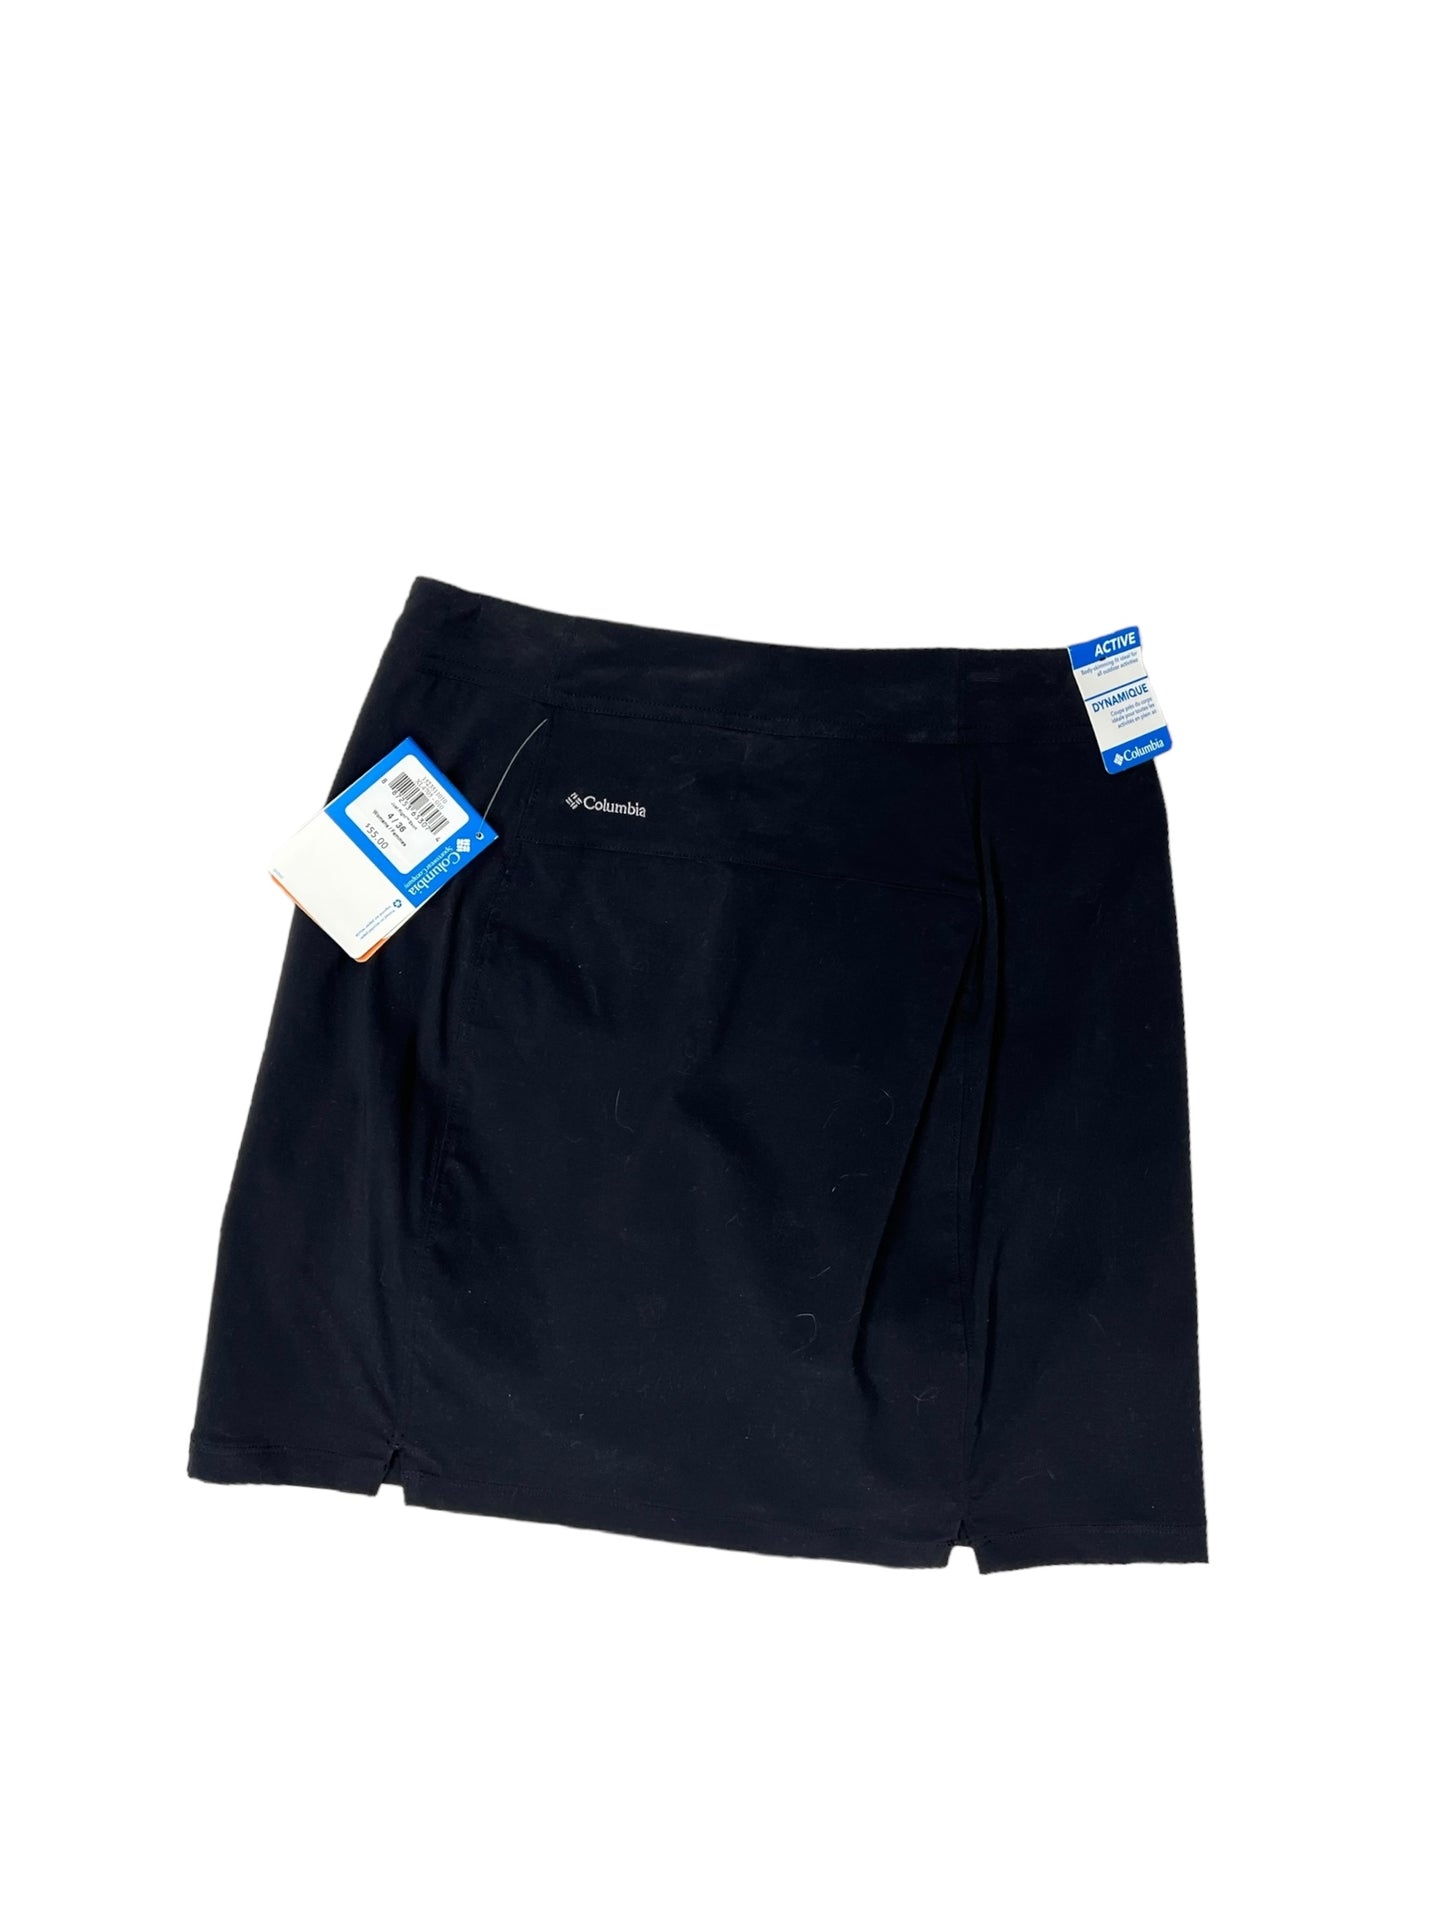 Athletic Skort By Columbia  Size: 4